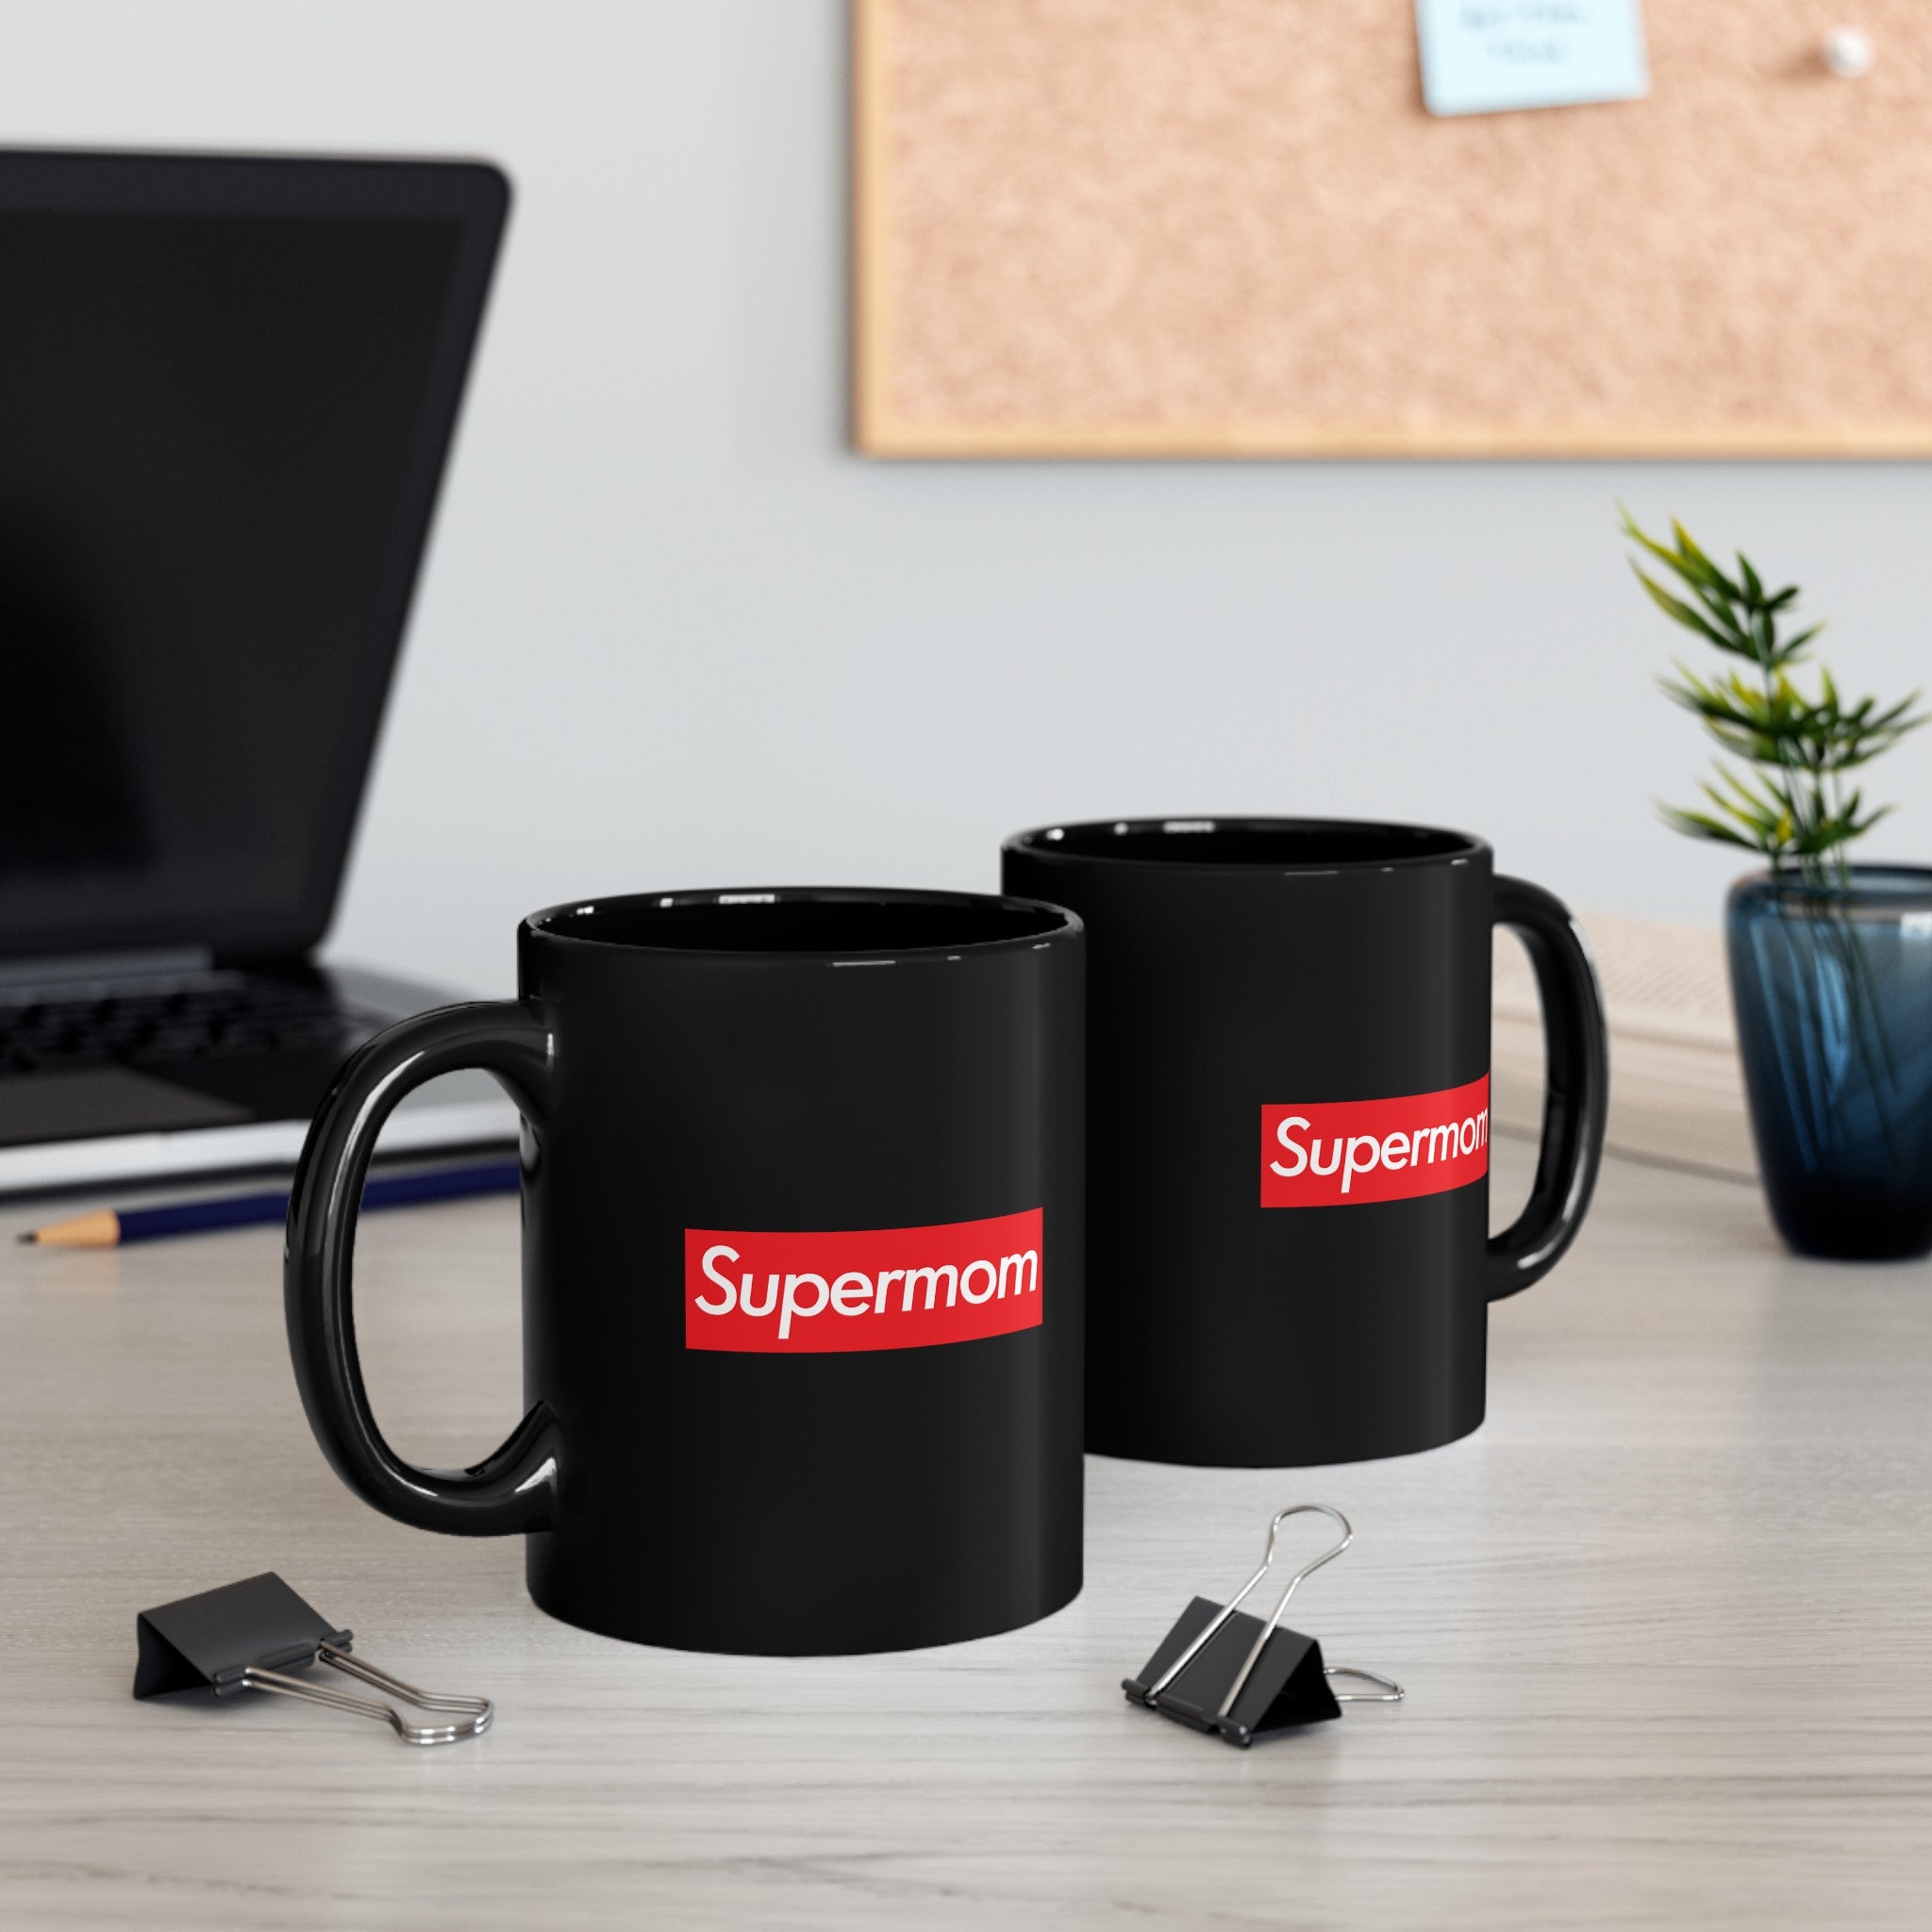 Supermom Black Mug (11oz, 15oz) super Inspired Funny Mom Mother Appreciation Gift For Mothers Moms Love Mother's Day Thank You Thankful Birthday Christmas